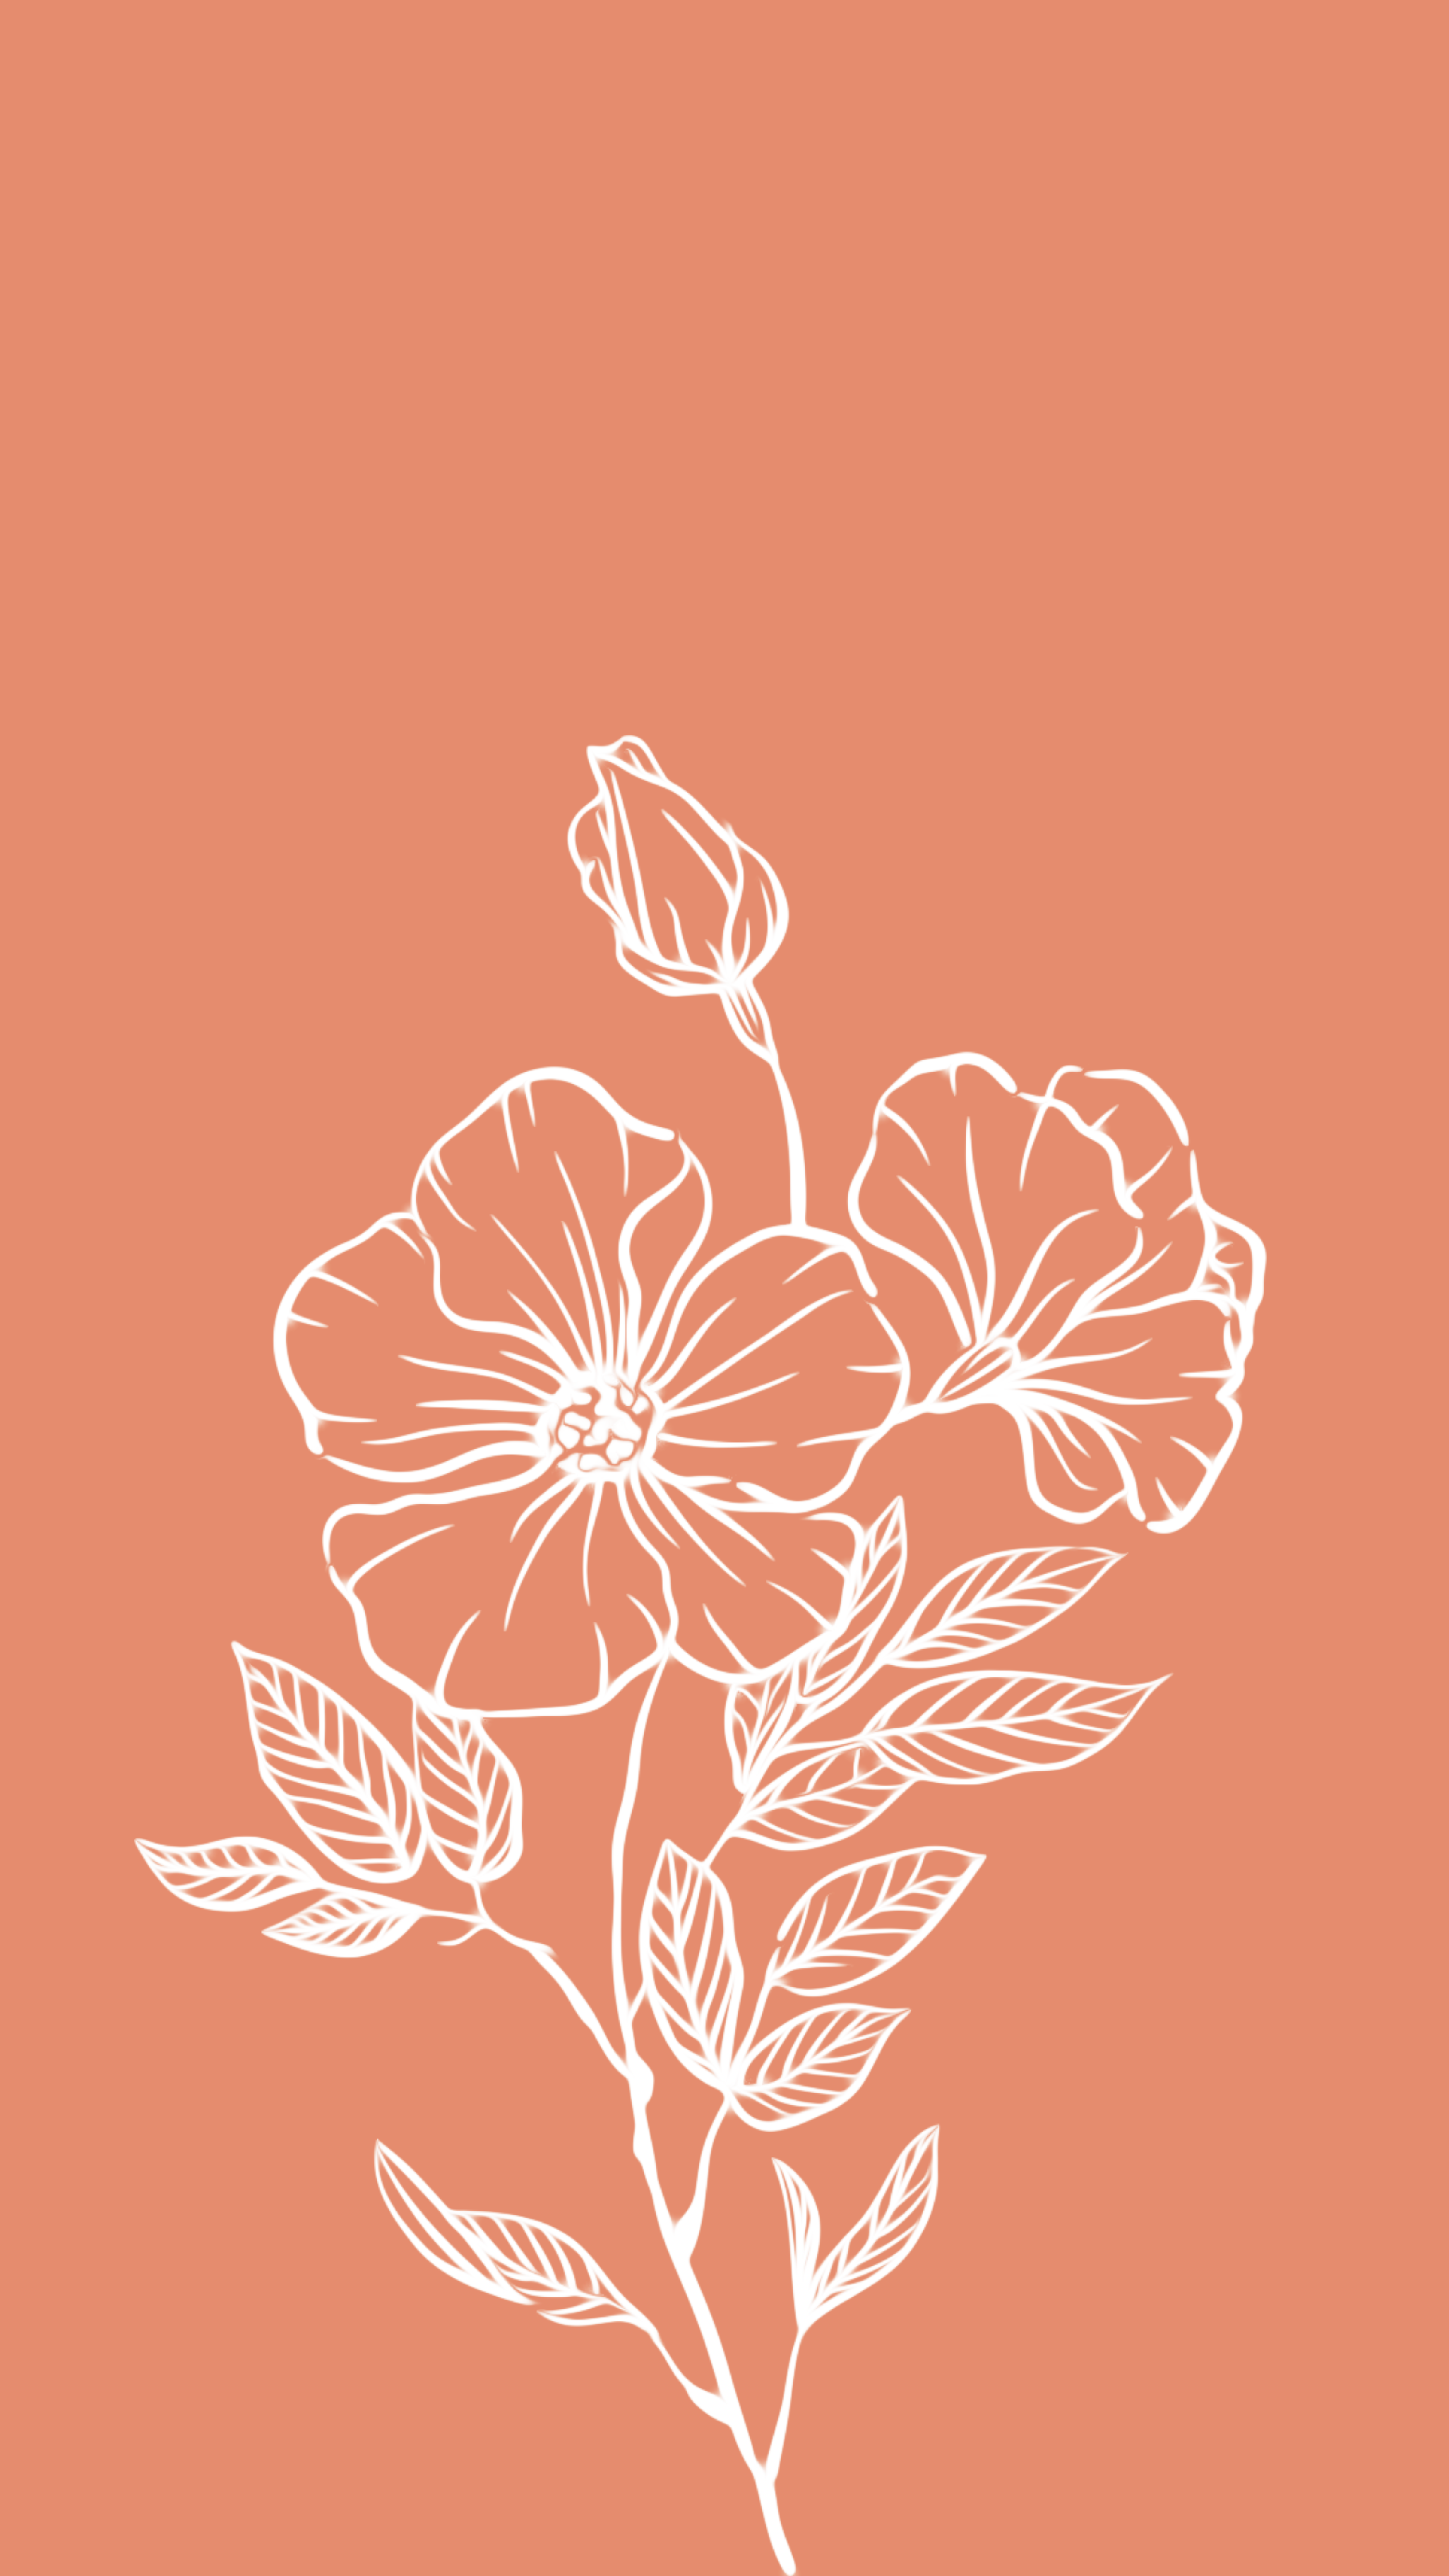 tudoo Shop. Redbubble. Flower iphone wallpaper, Flower graphic design, Drawing wallpaper